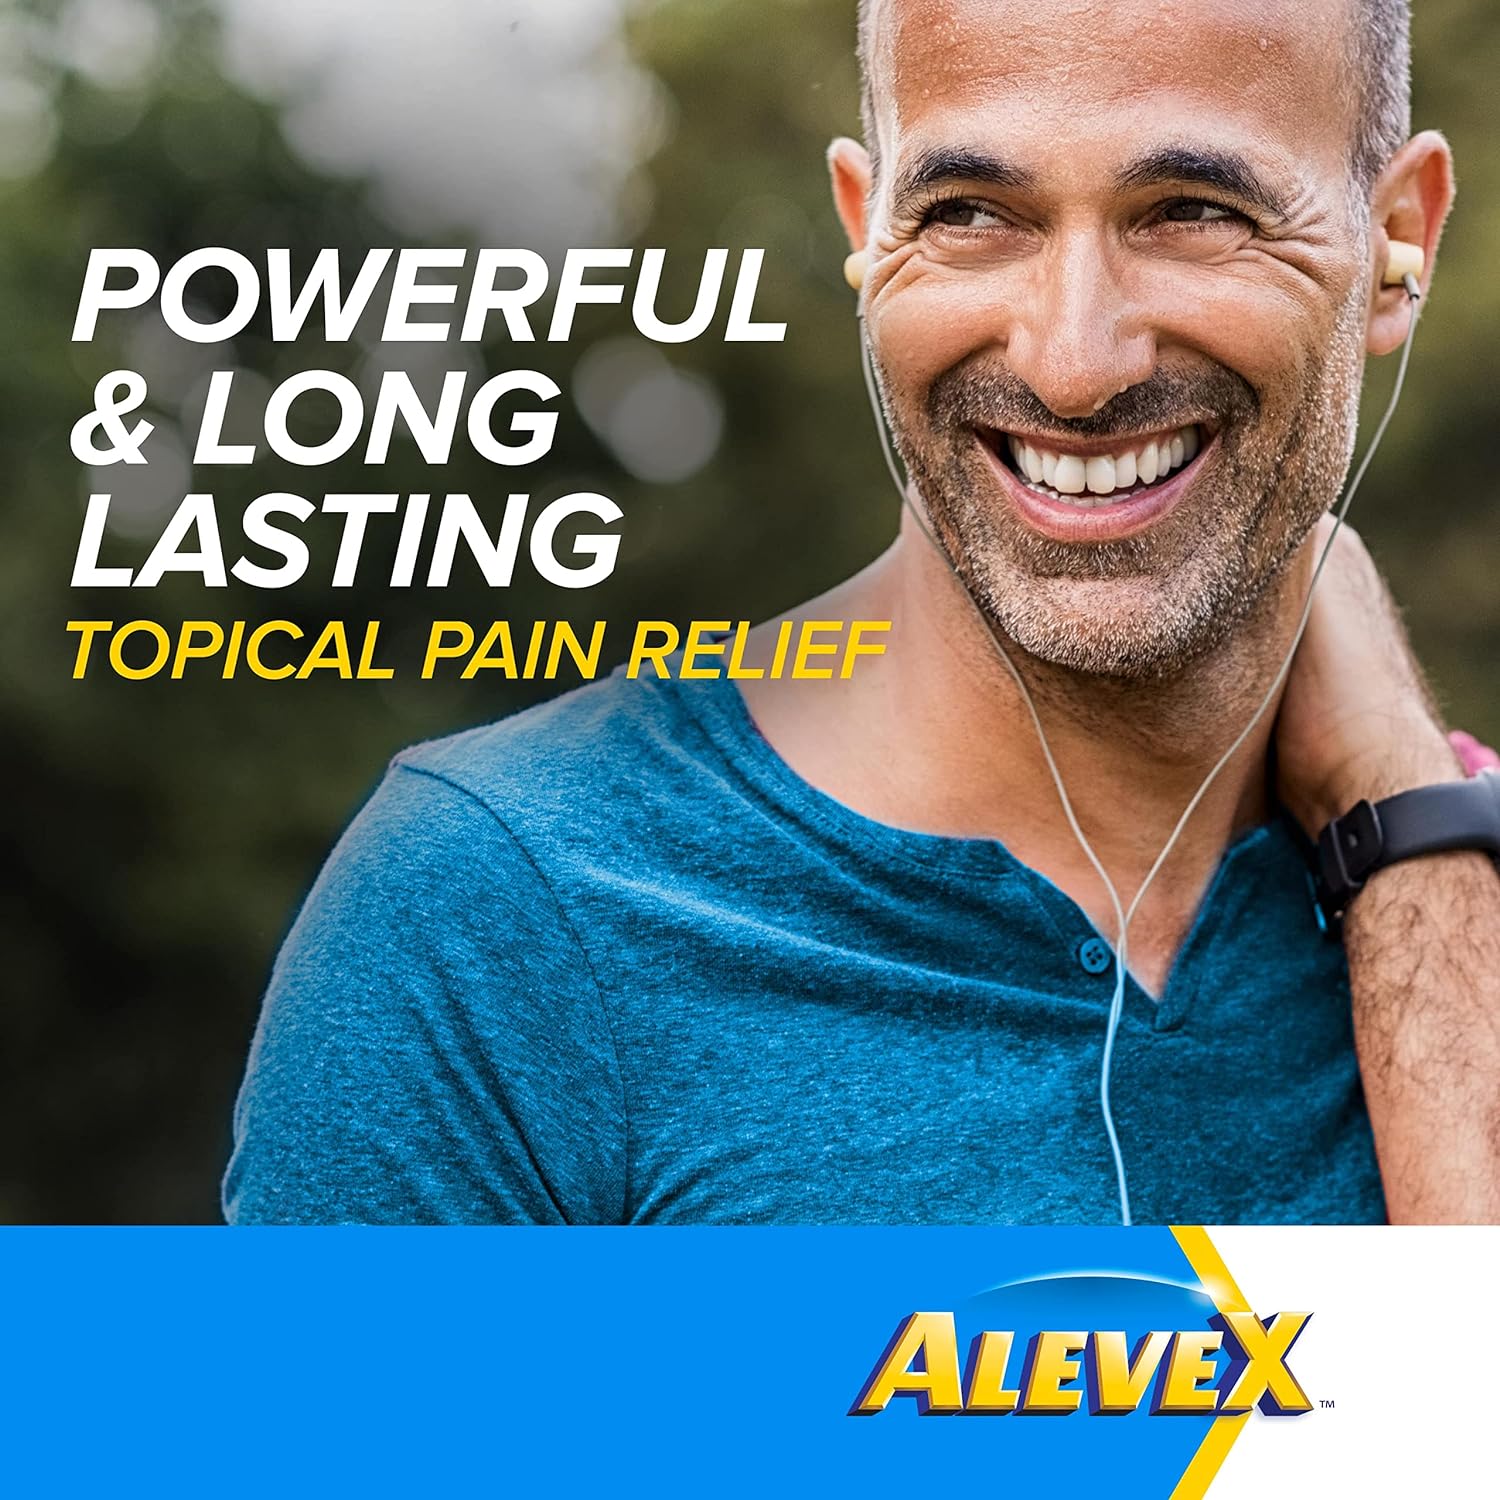 AleveX? Pain Relieving Lotion, Powerful & Long Lasting for Targeted Joint & Muscle Pain Relief, 2.7oz Tube : Health & Household